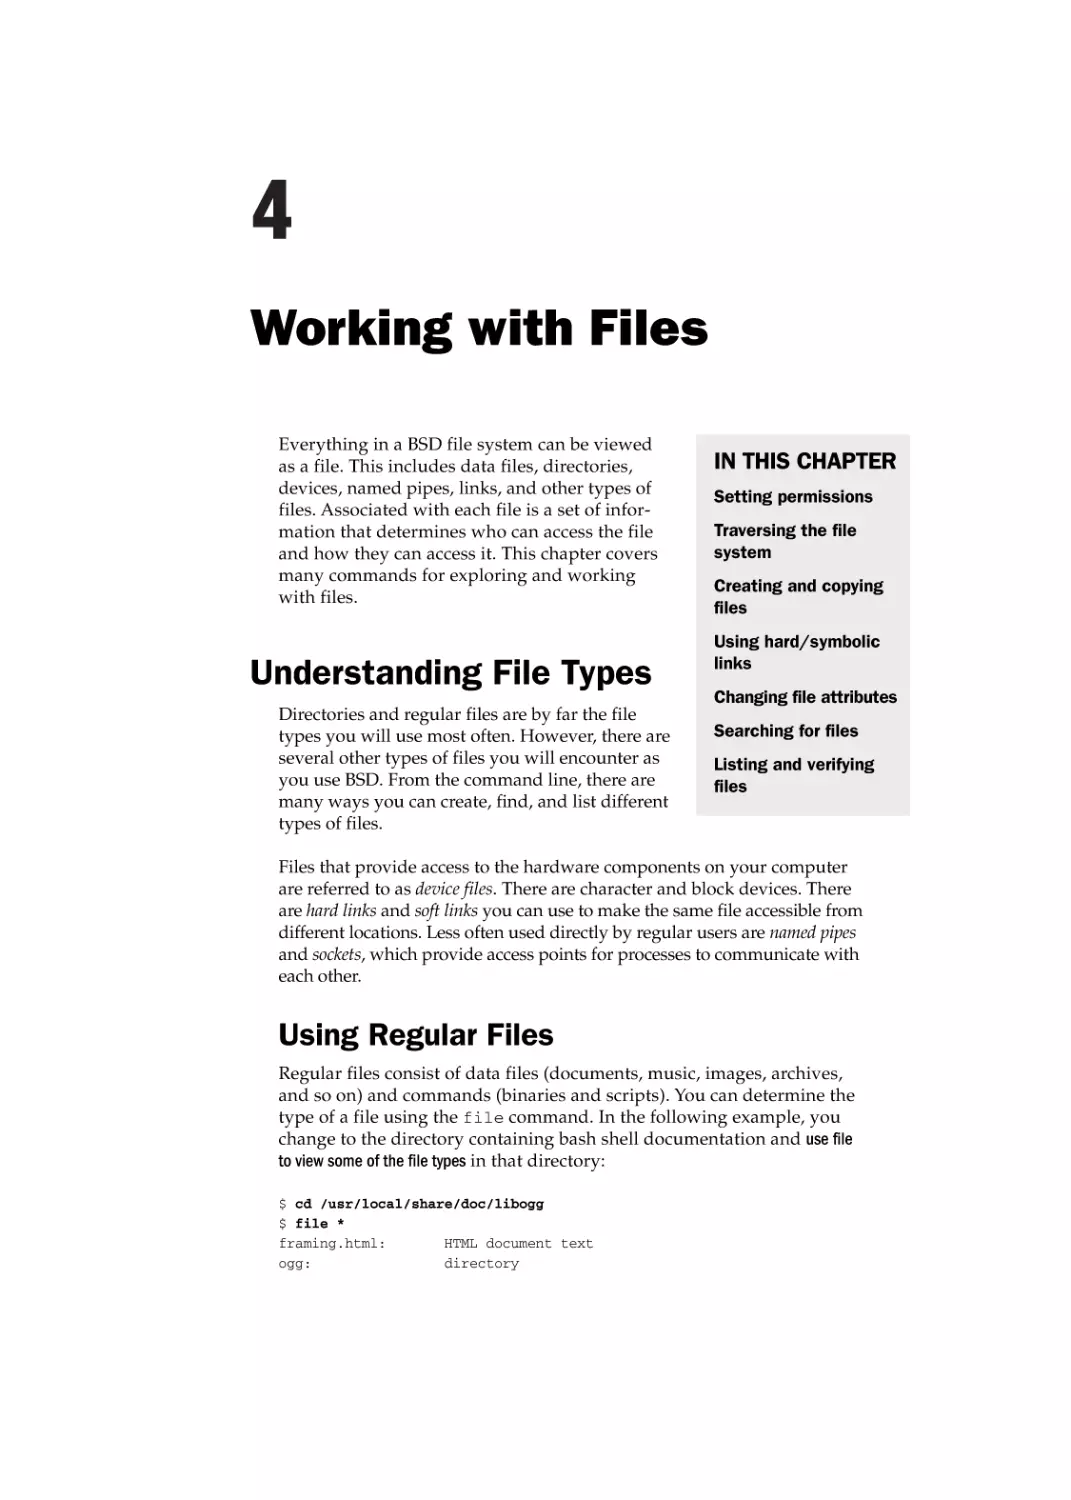 Chapter 4
Understanding File Types